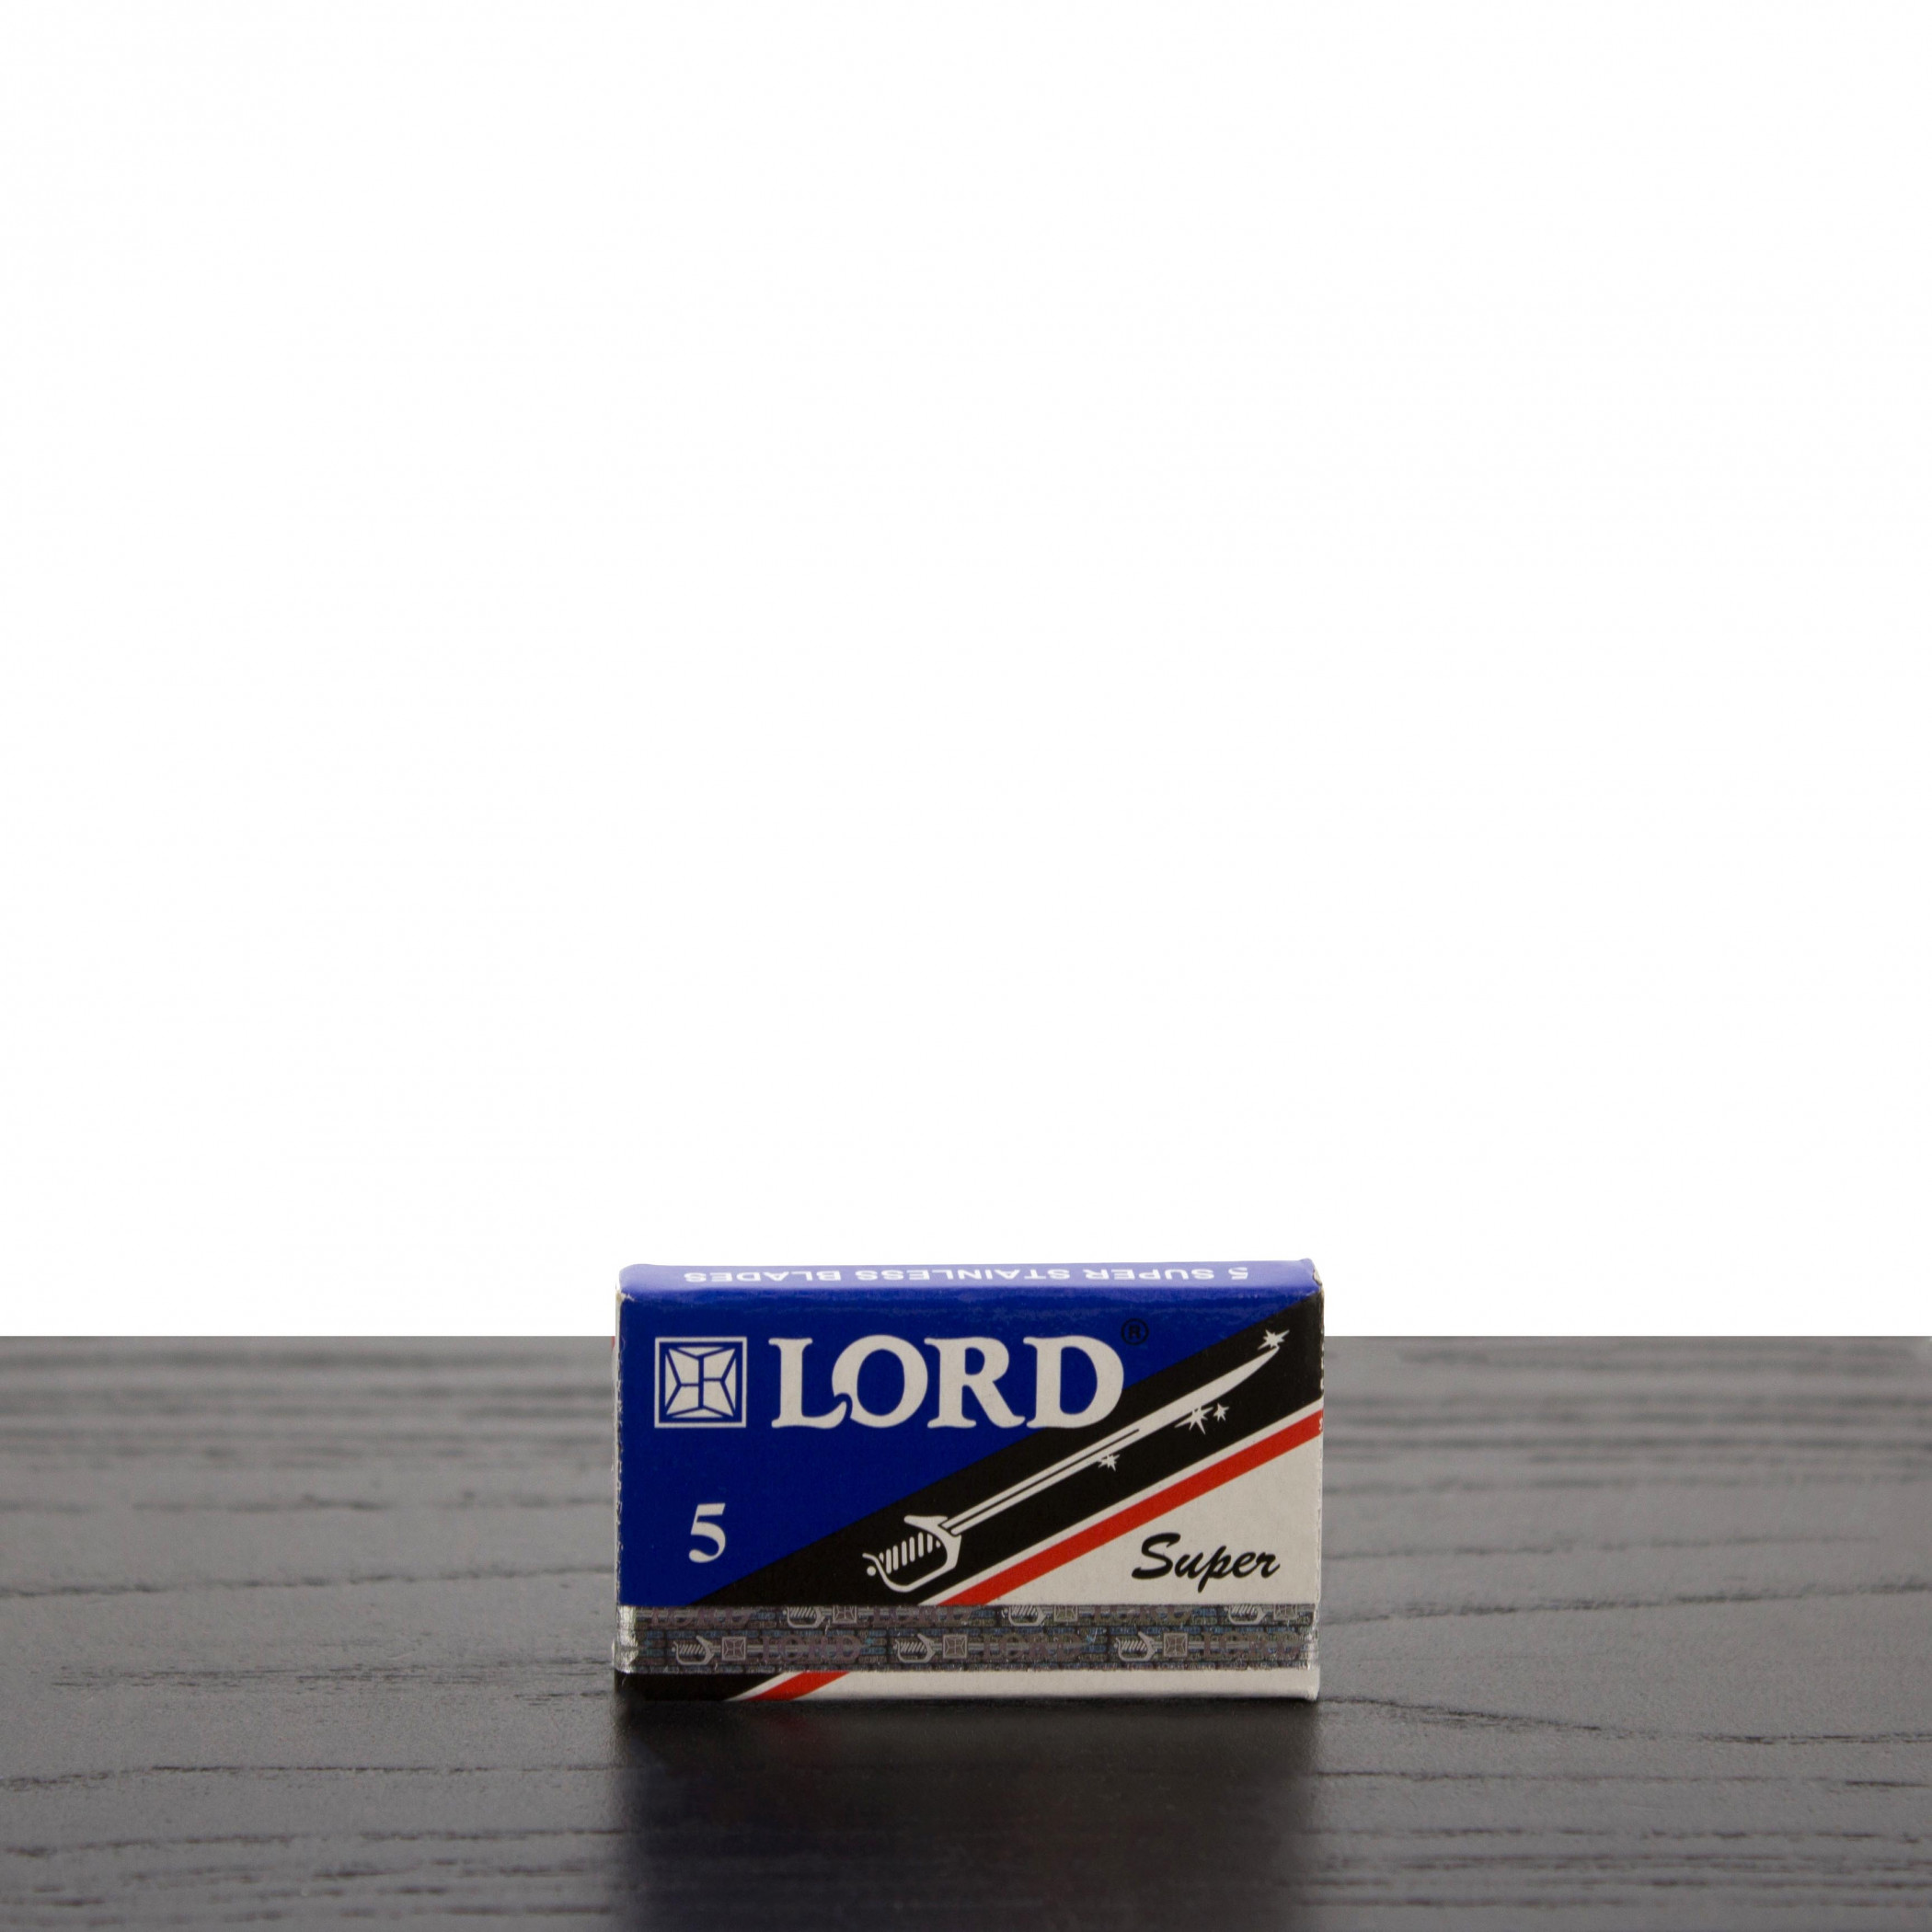 Product image 0 for Lord Super Stainless Double Edge Razor Blades (5 Blades)